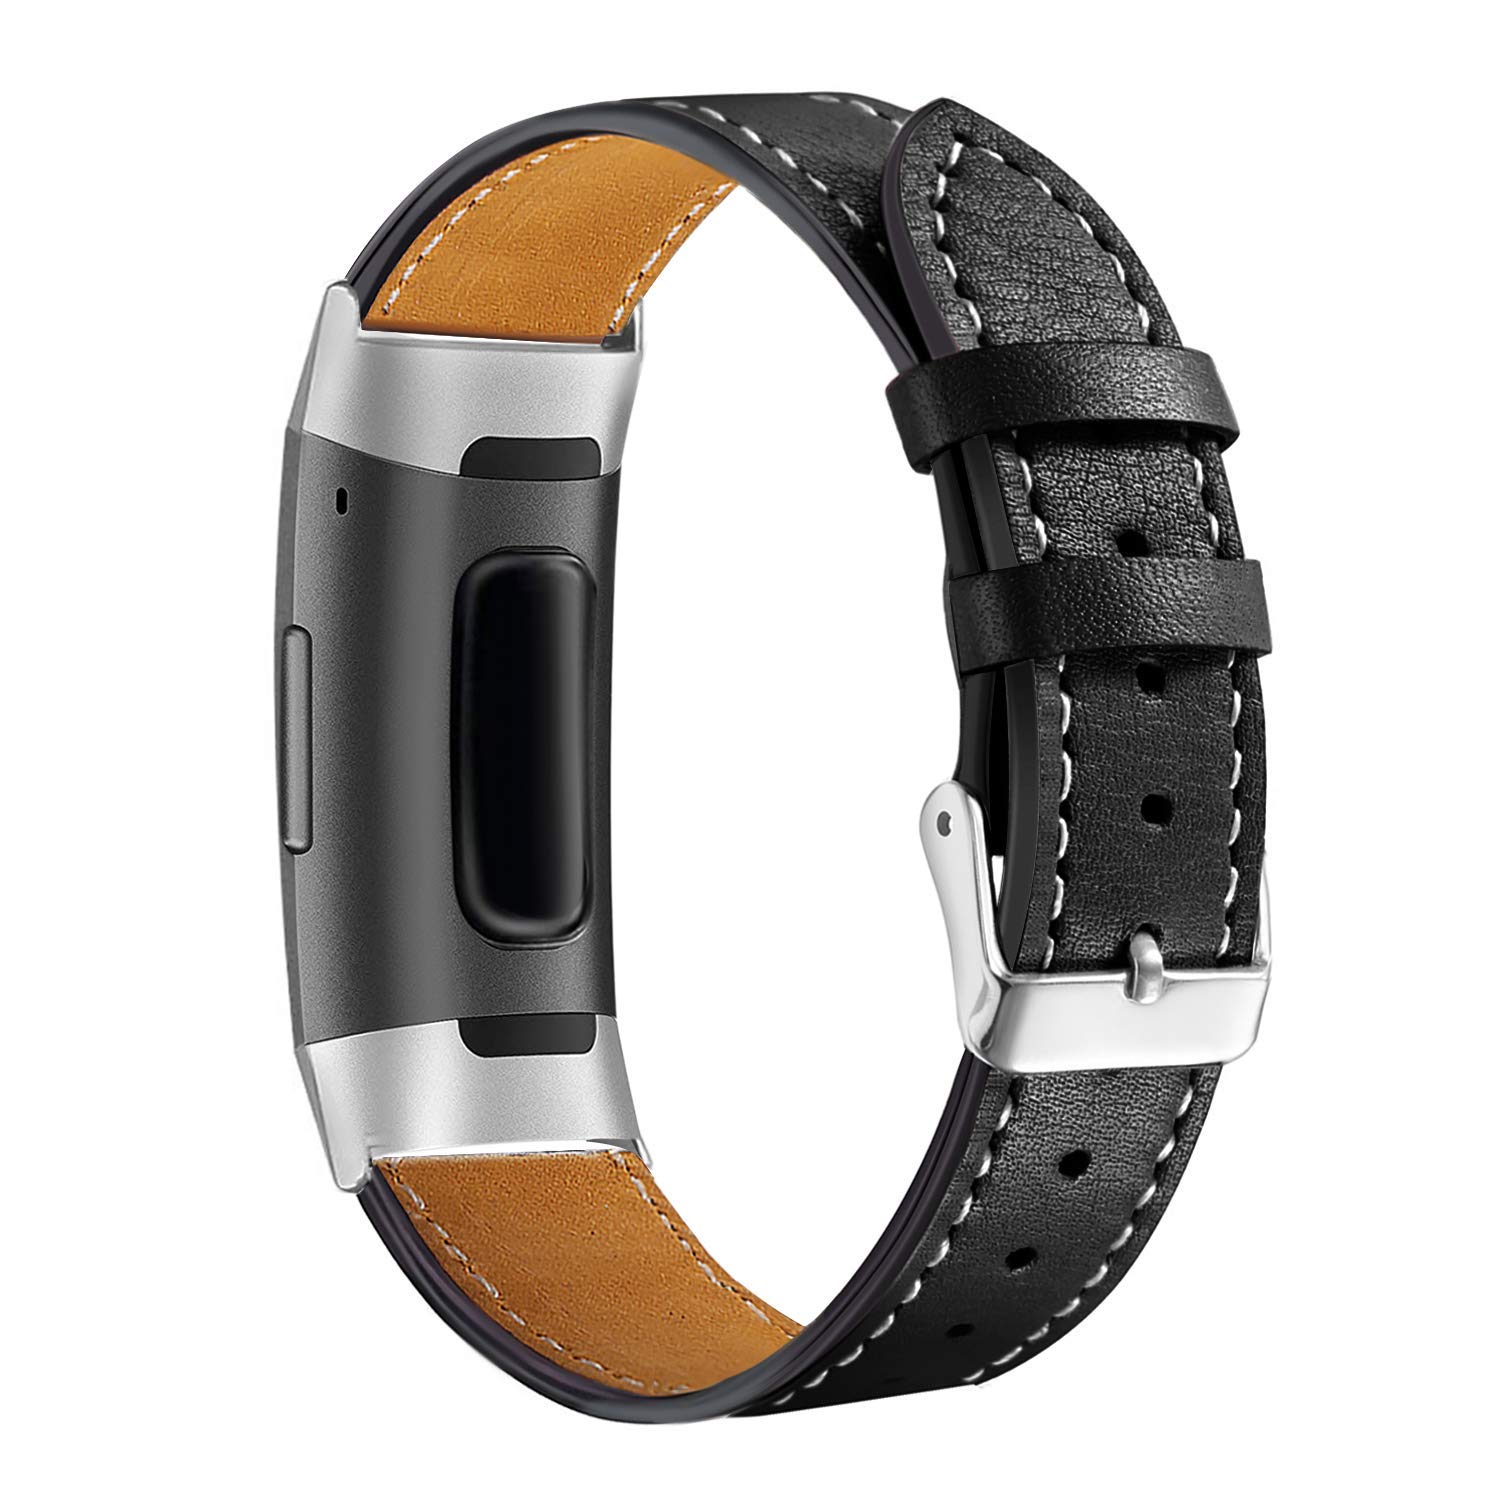 stak Vil have Forbipasserende Leather Band for Fitbit Charge 3 & Charge 4 | North Street Watch Co.